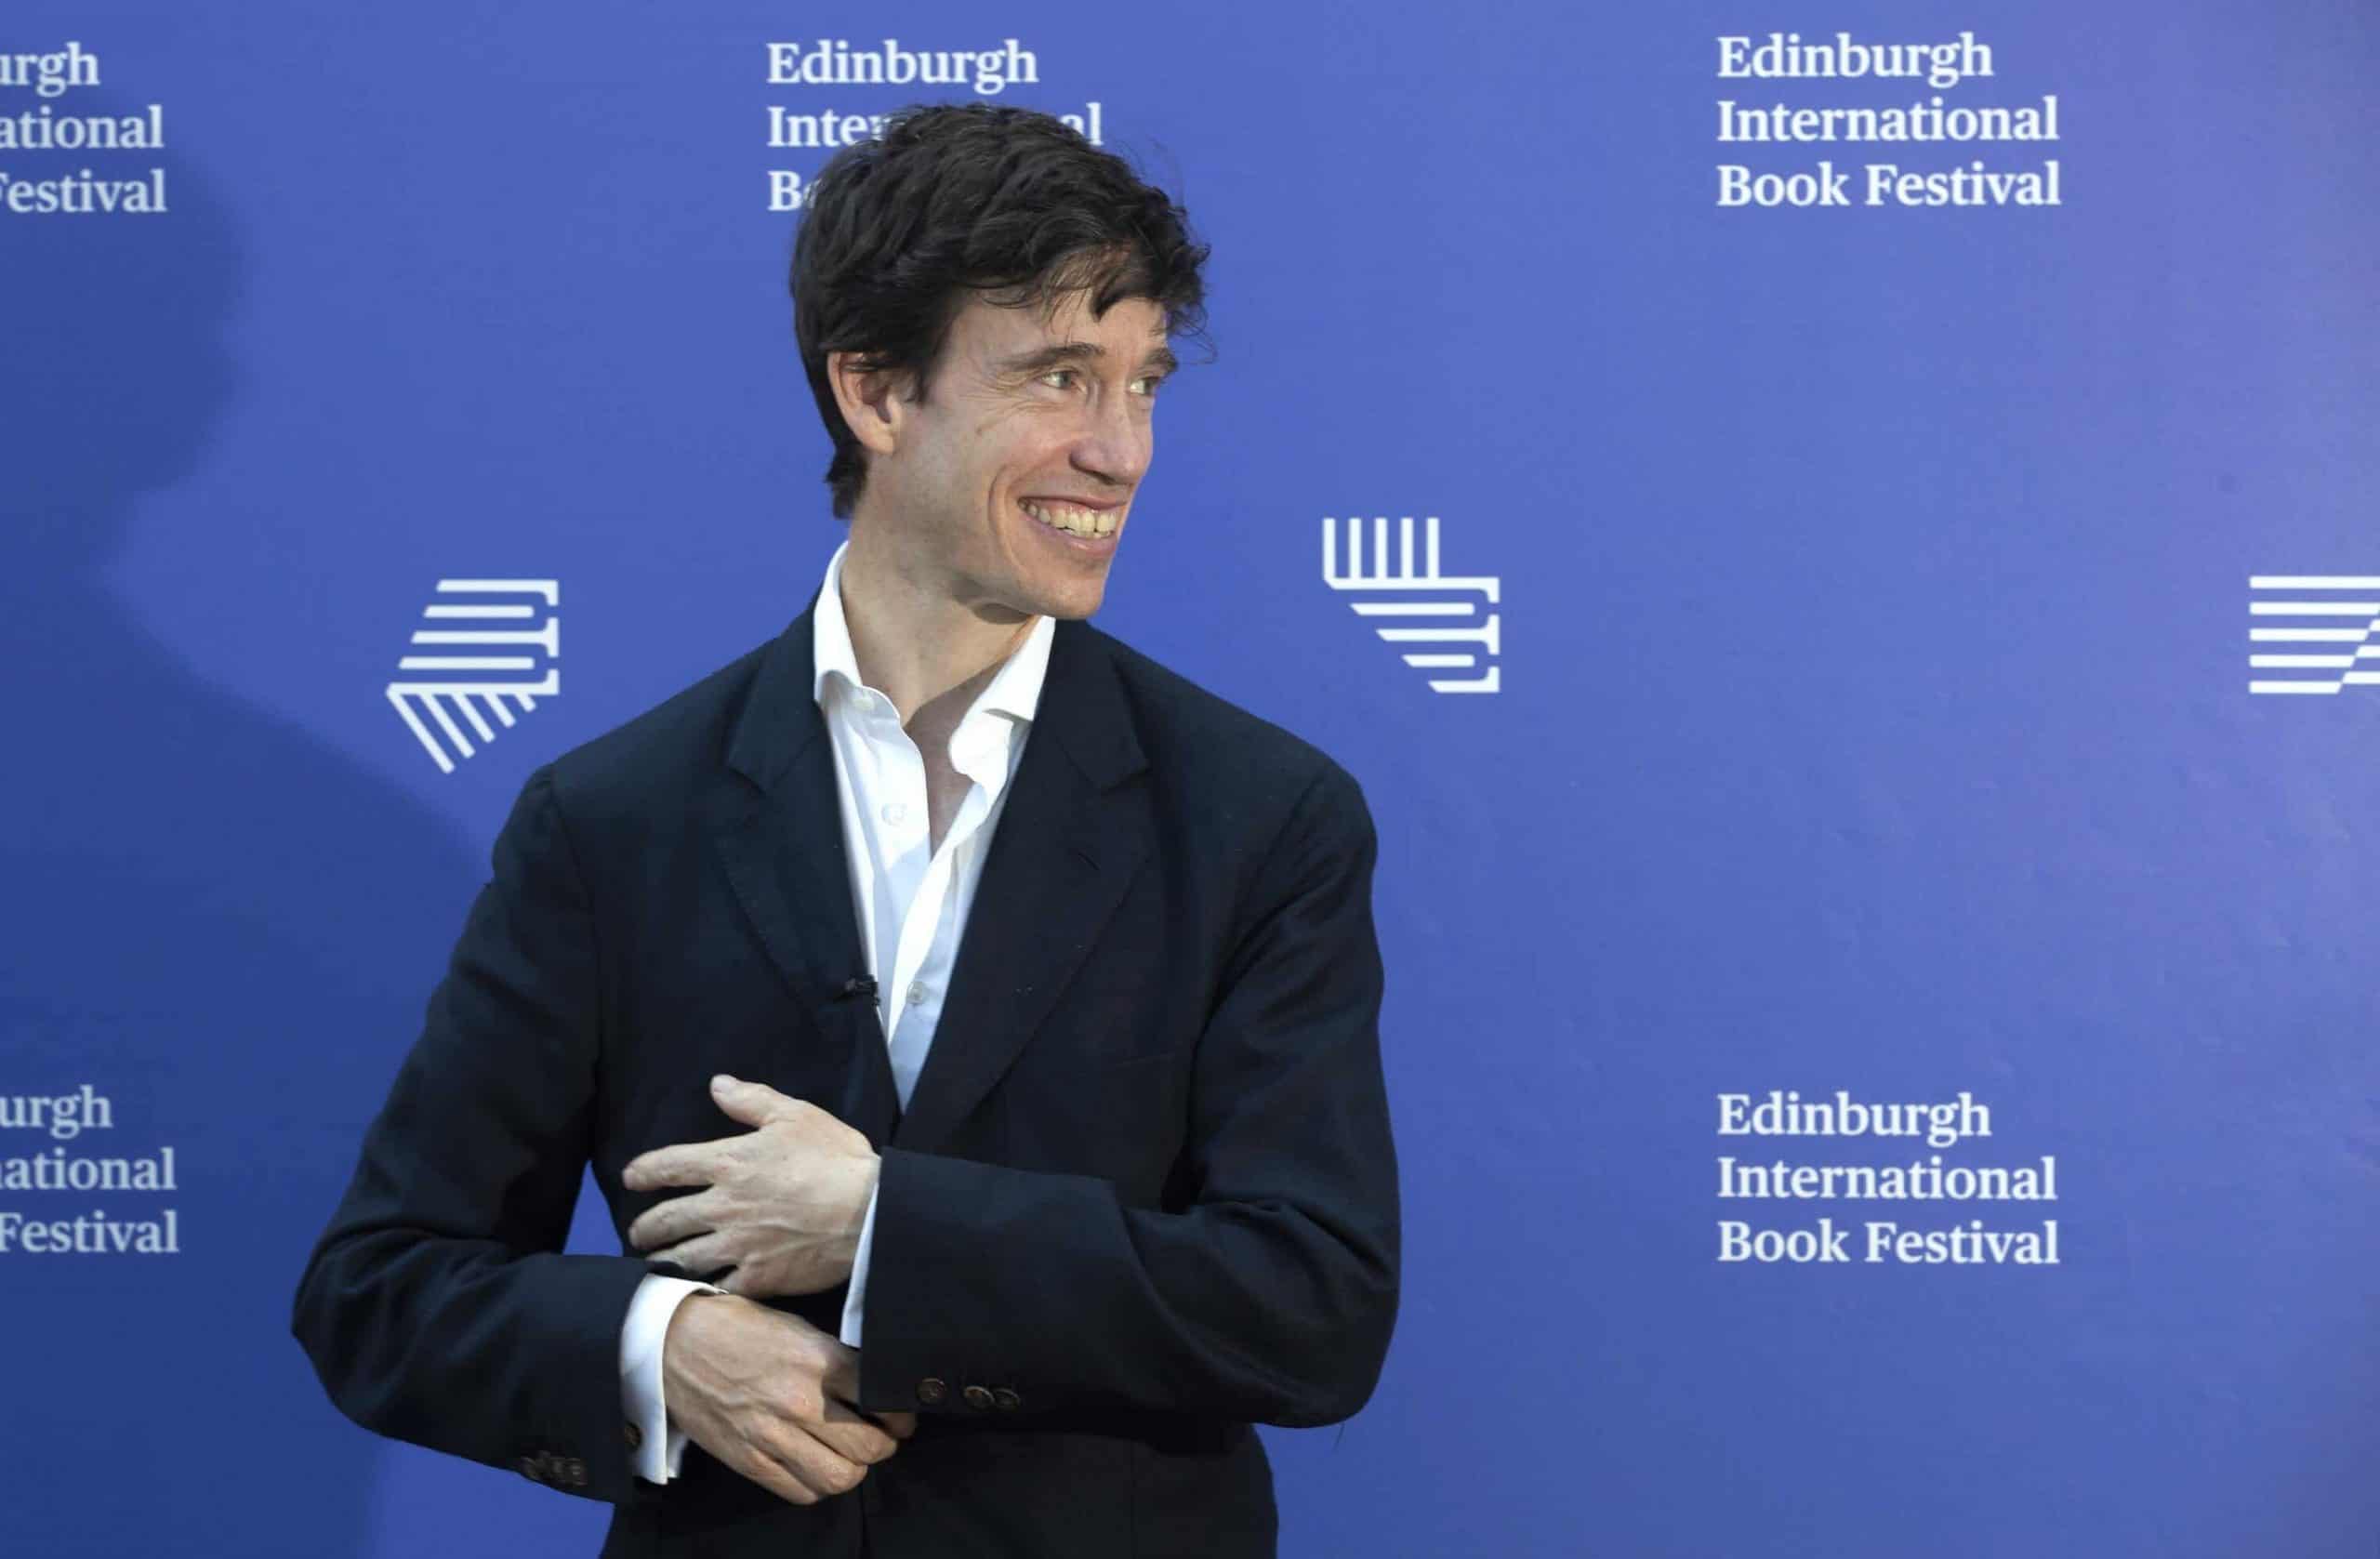 Rory Stewart says centre is a “lonely place to be” as extremities collide